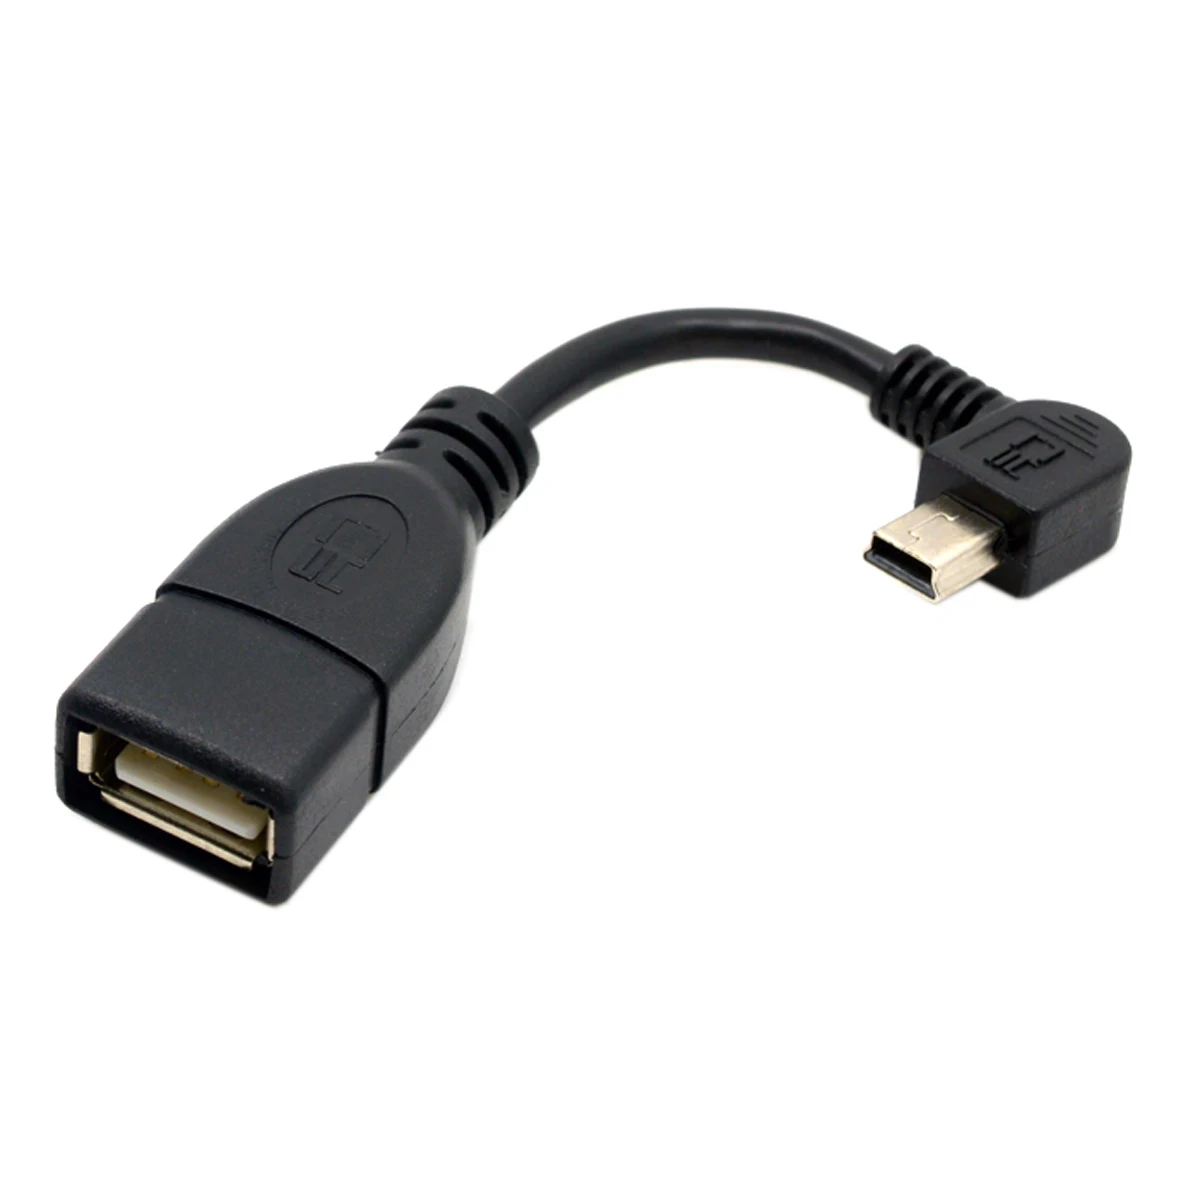 

CY USB 2.0 A Female OTG to Left Angled 90 Degree Mini B 5PIN Male Cable 10cm